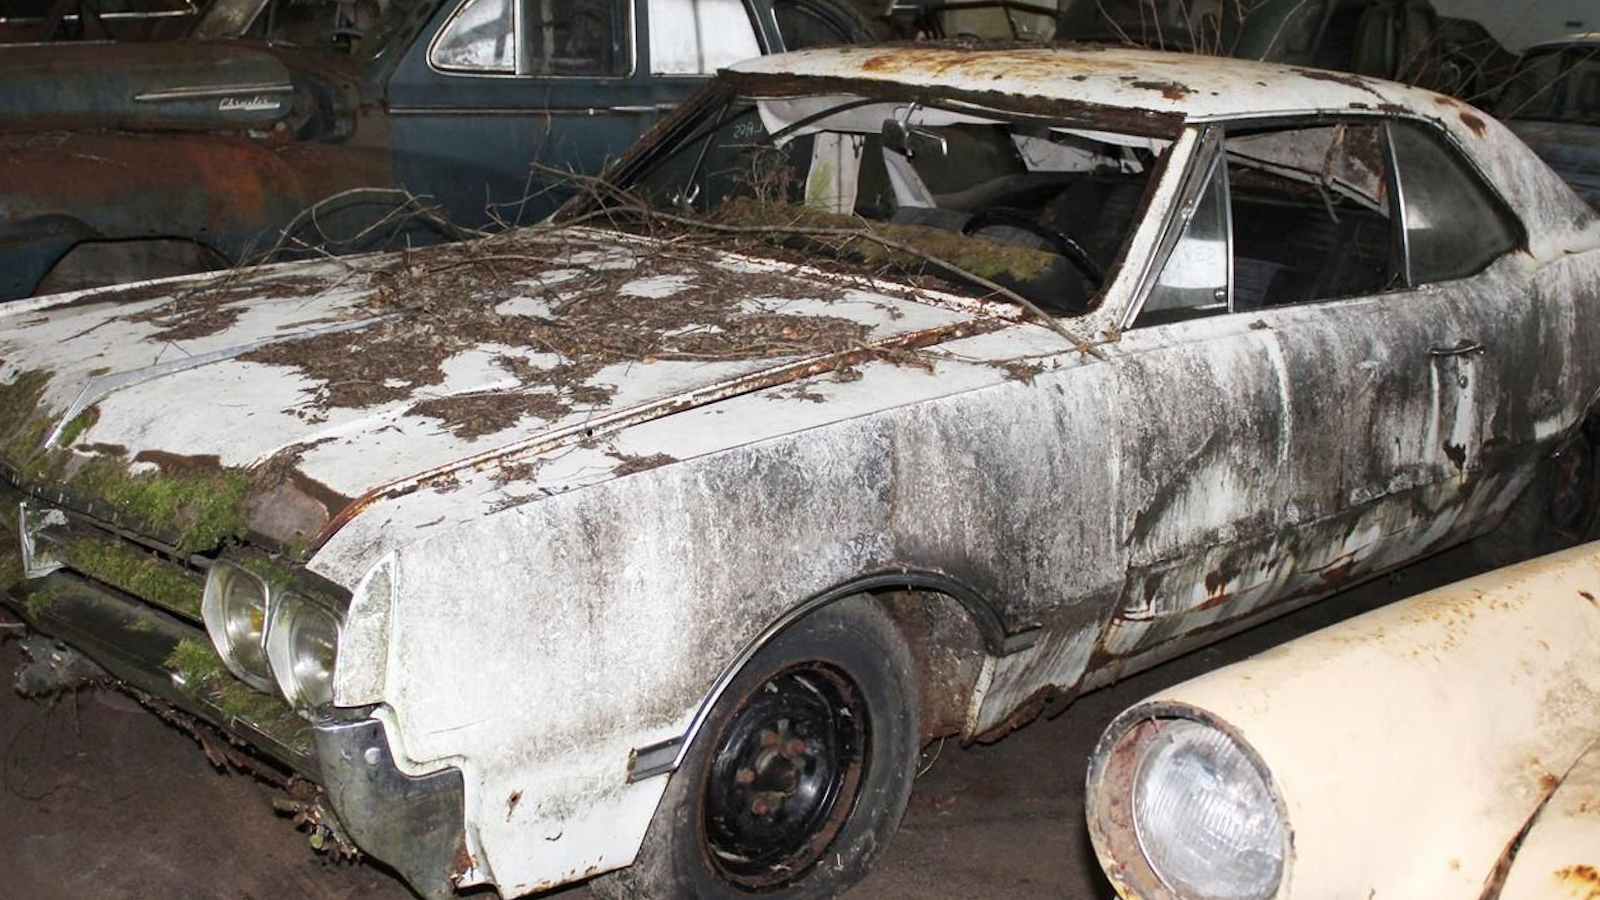 81 dusty classics unearthed in bumper French barn-find